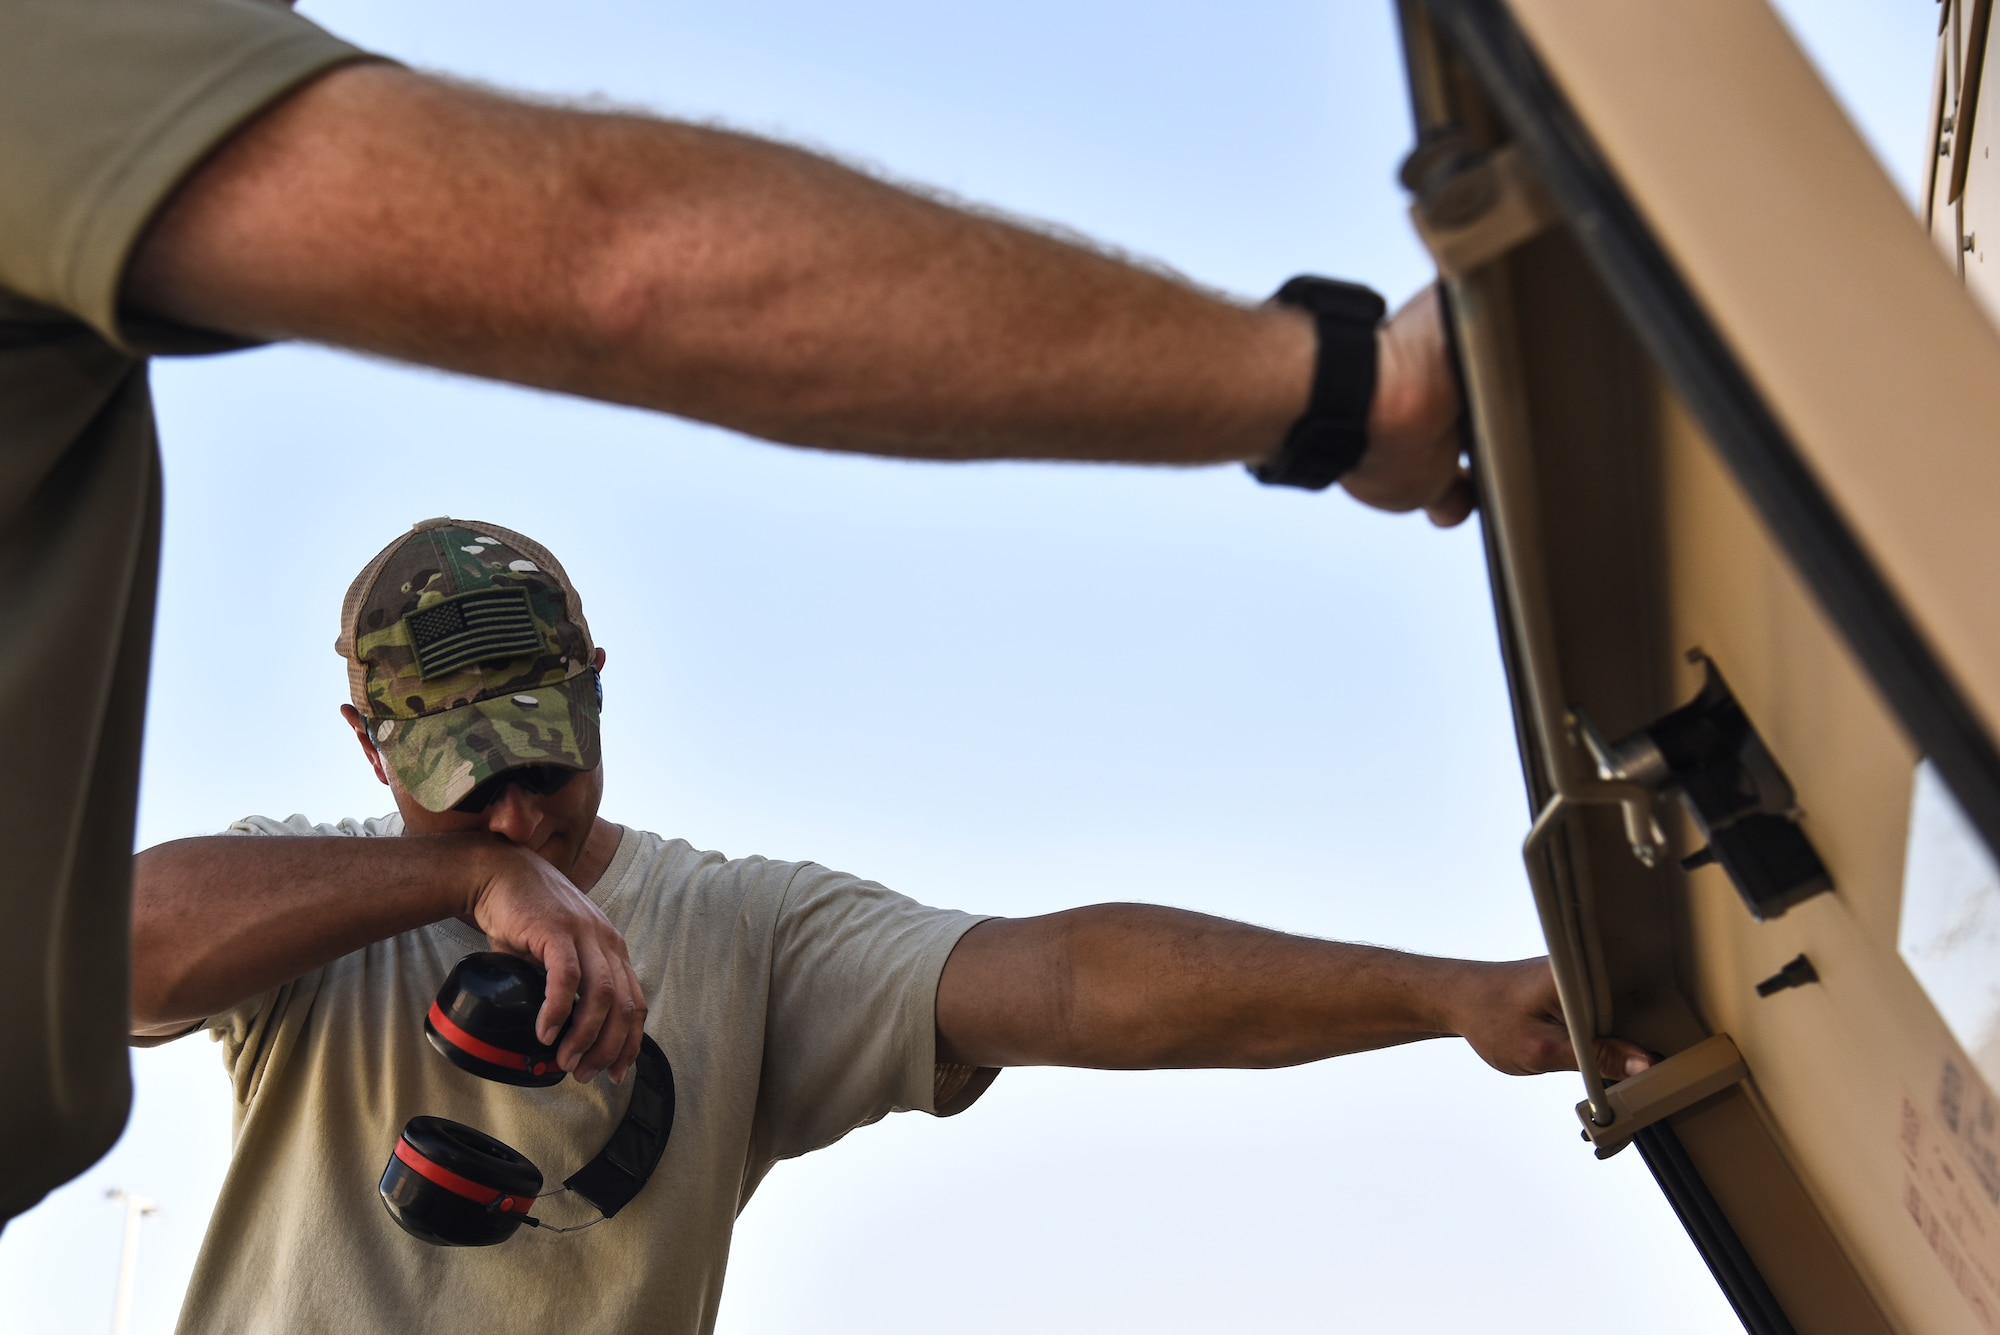 U.S. Air Force Staff Sgt. Shaun Kelly, 380th Expeditionary Civil Engineer Squadron electrical power production craftsman, performs a daily inspection on a generator at Al Dhafra Air Base, United Arab Emirates, Nov. 19, 2018. The Power Production flight provides two main capabilities: maintaining power generators for buildings across the installation, and ensuring the integrity of the fighter aircraft arresting barrier systems on the flight line. (U.S. Air Force photo by Senior Airman Mya M. Crosby)